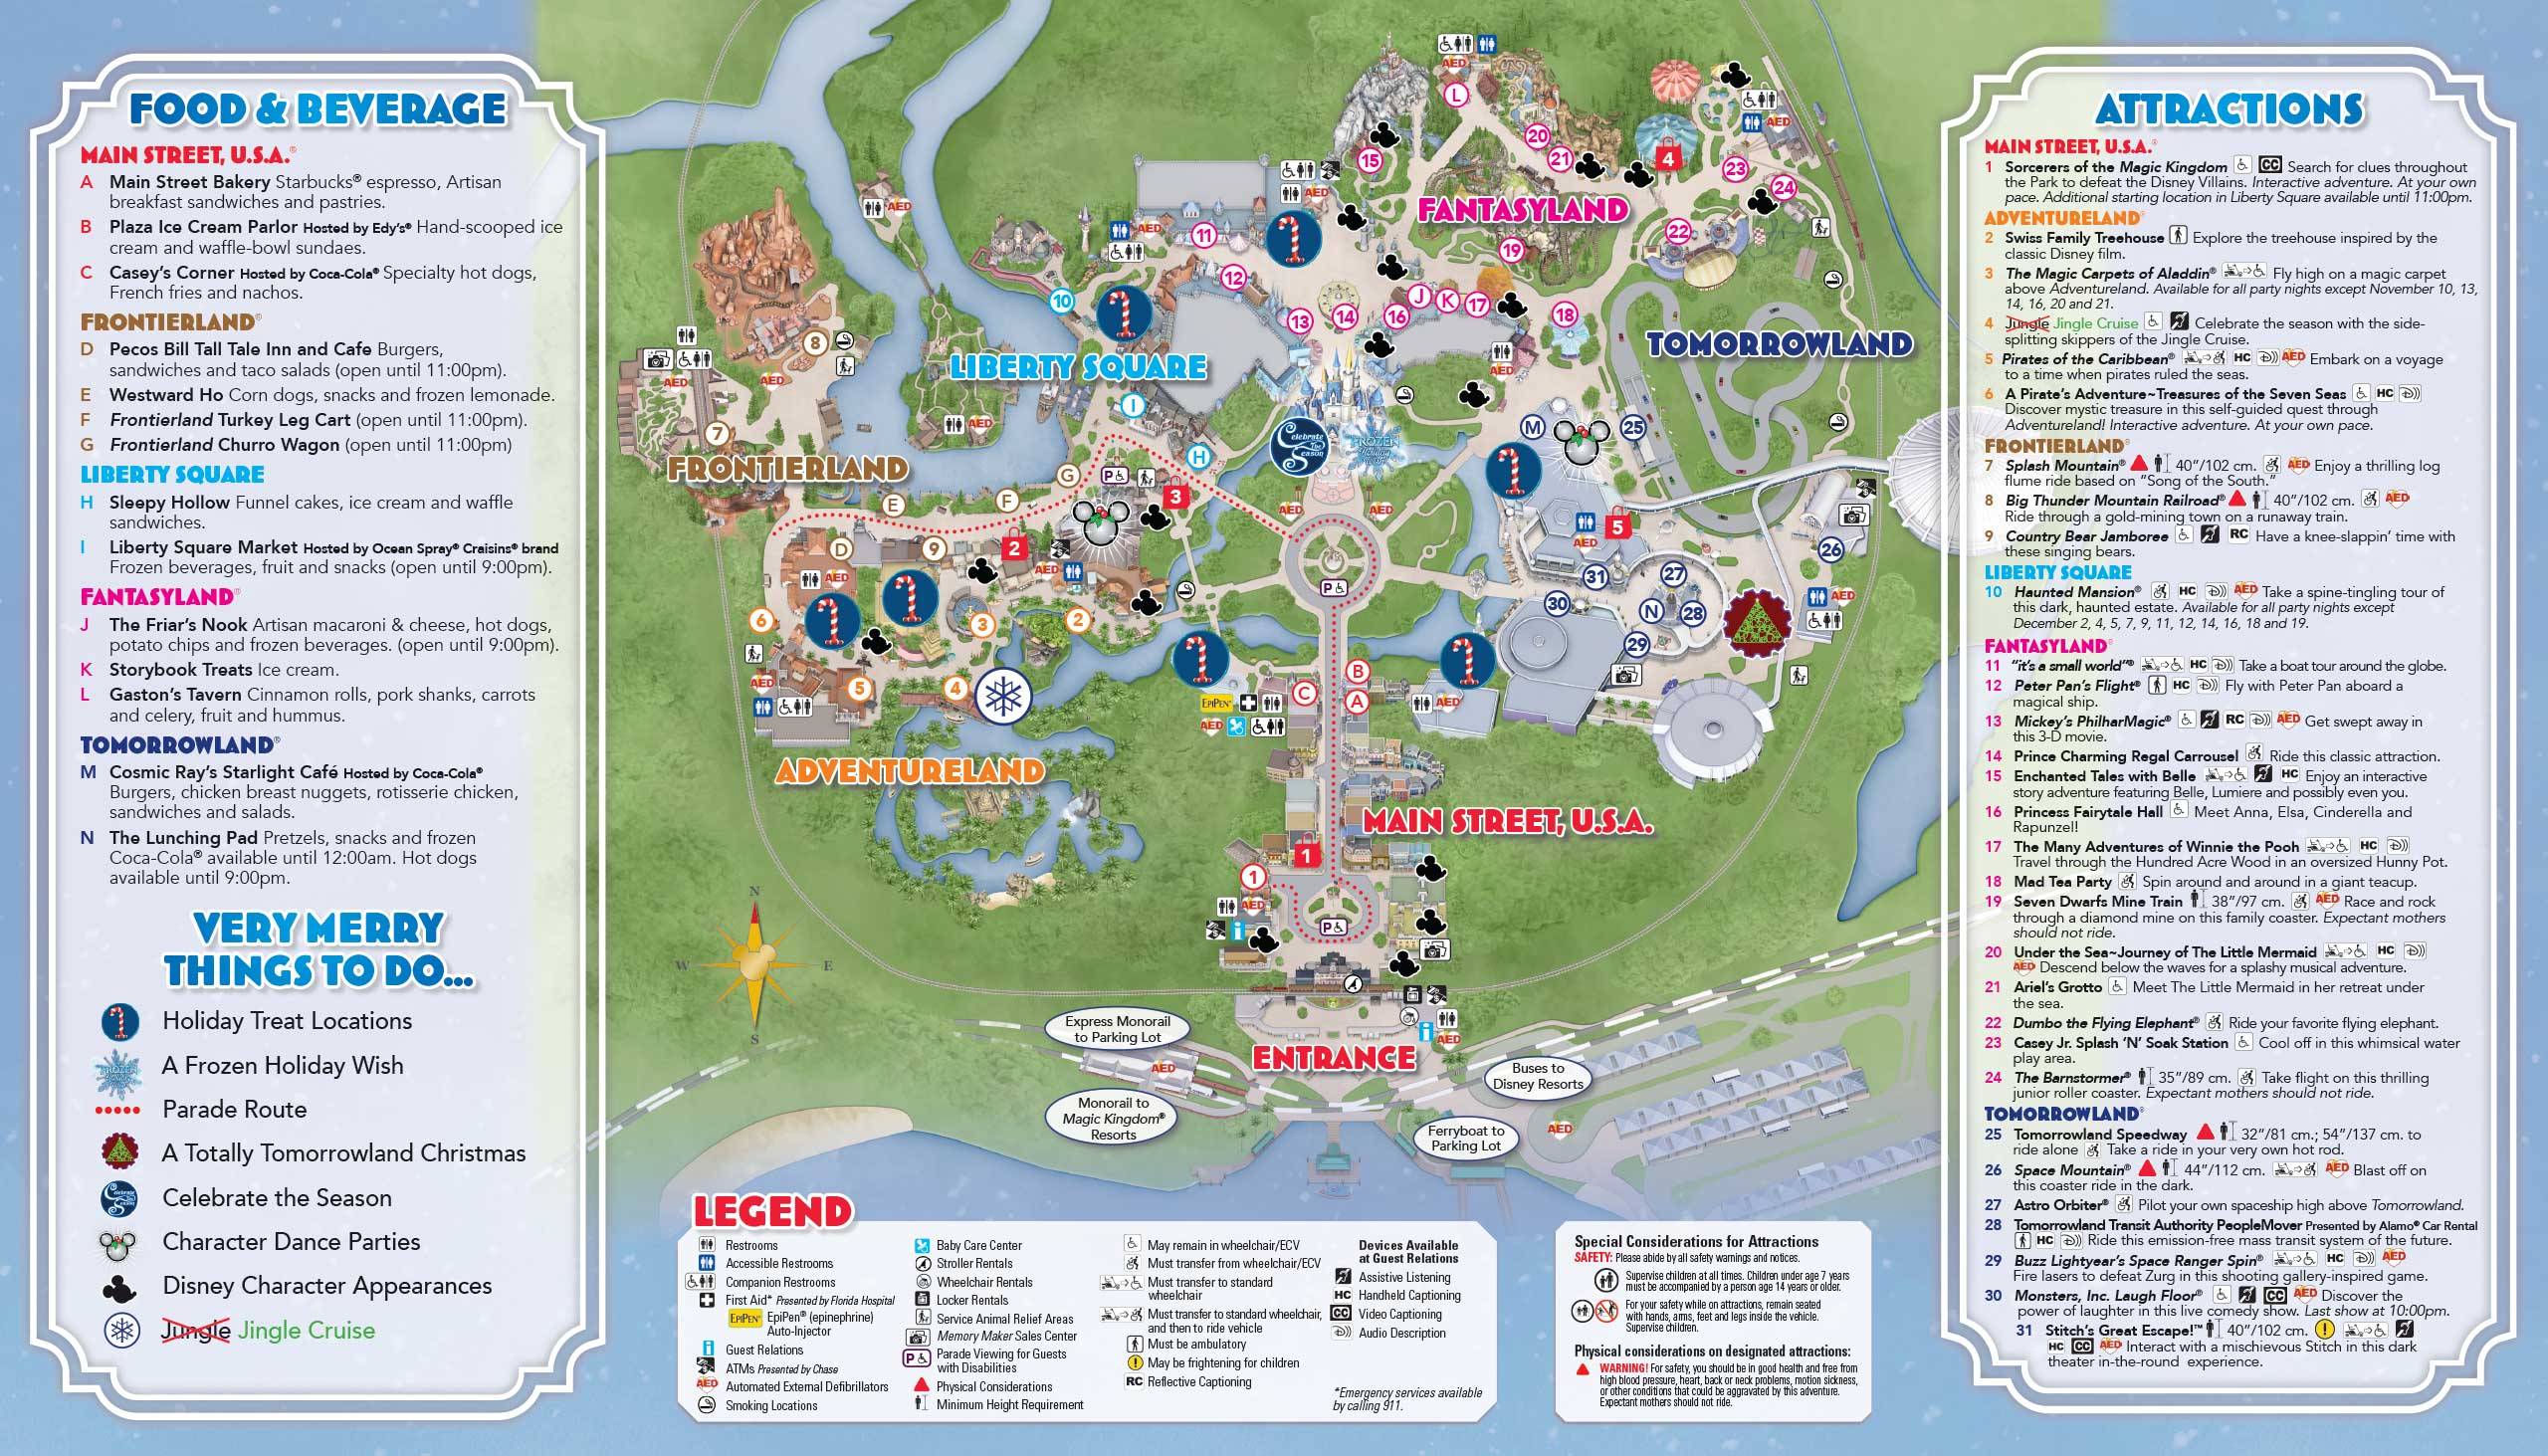 Mickey's Very Merry Christmas Party 2014 guide map